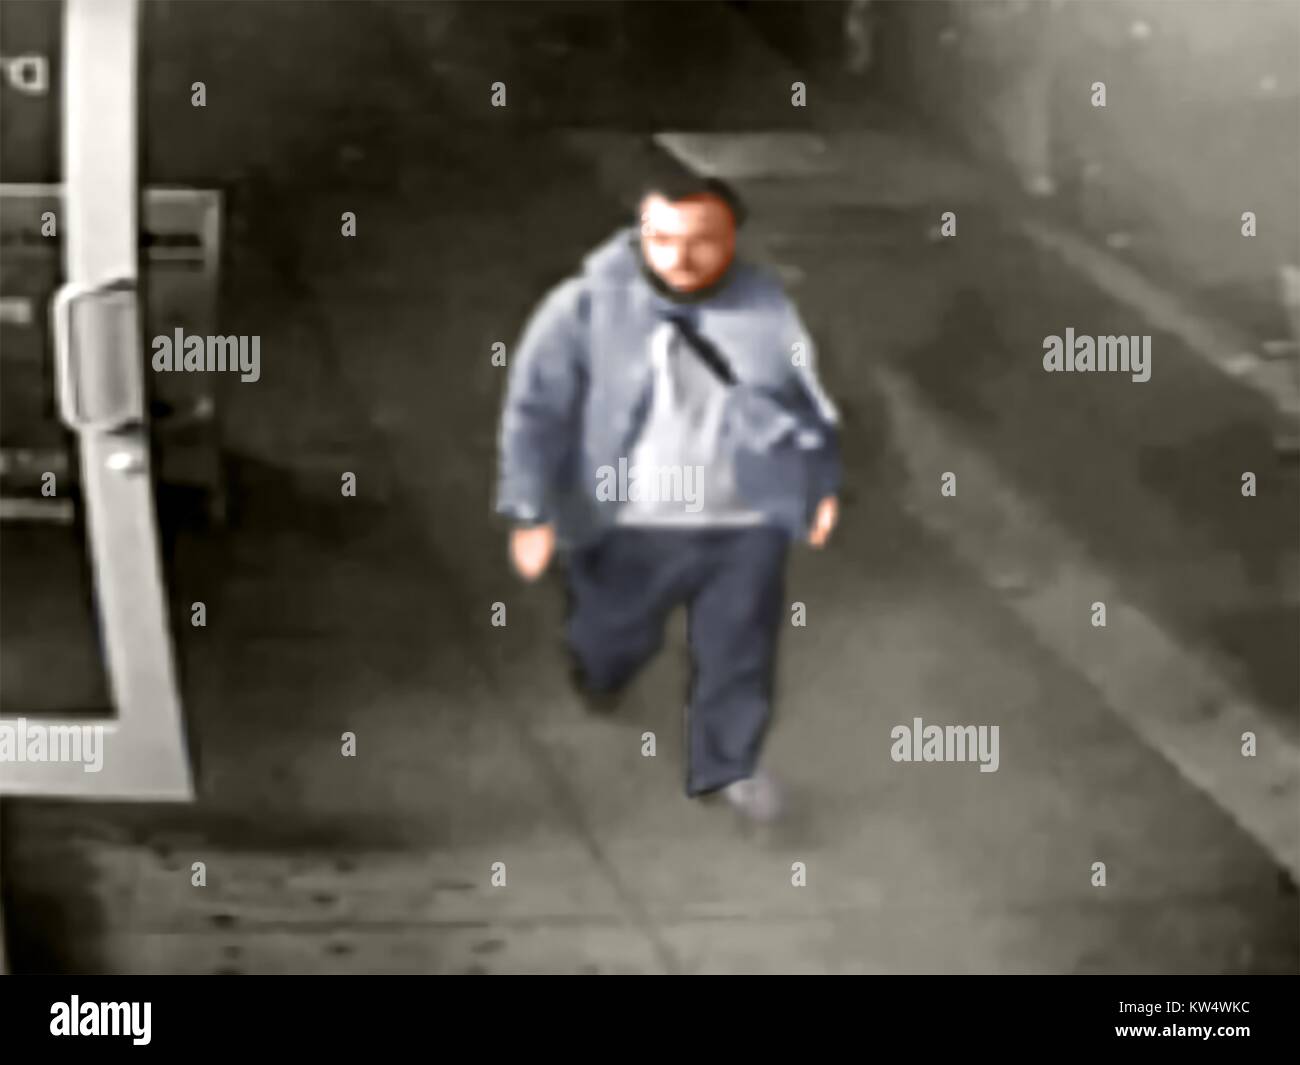 Digitally colorized image from a surveillance camera frame of Admad Khan Rahami, a suspect in the September 17, 2016 bombings which took place in the Chelsea neighborhood of New York City, New York, September 17, 2016. Original image from a still released by the New Jersey Police. NOTE: THIS IMAGE HAS BEEN DIGITALLY COLORIZED USING COLORS DERIVED FROM PHOTOGRAPHS OF THE SUSPECT; COLORS MAY NOT BE ACCURATE AND SHOULD NOT BE USED FOR IDENTIFICATION/INVESTIGATIVE PURPOSES. Stock Photo